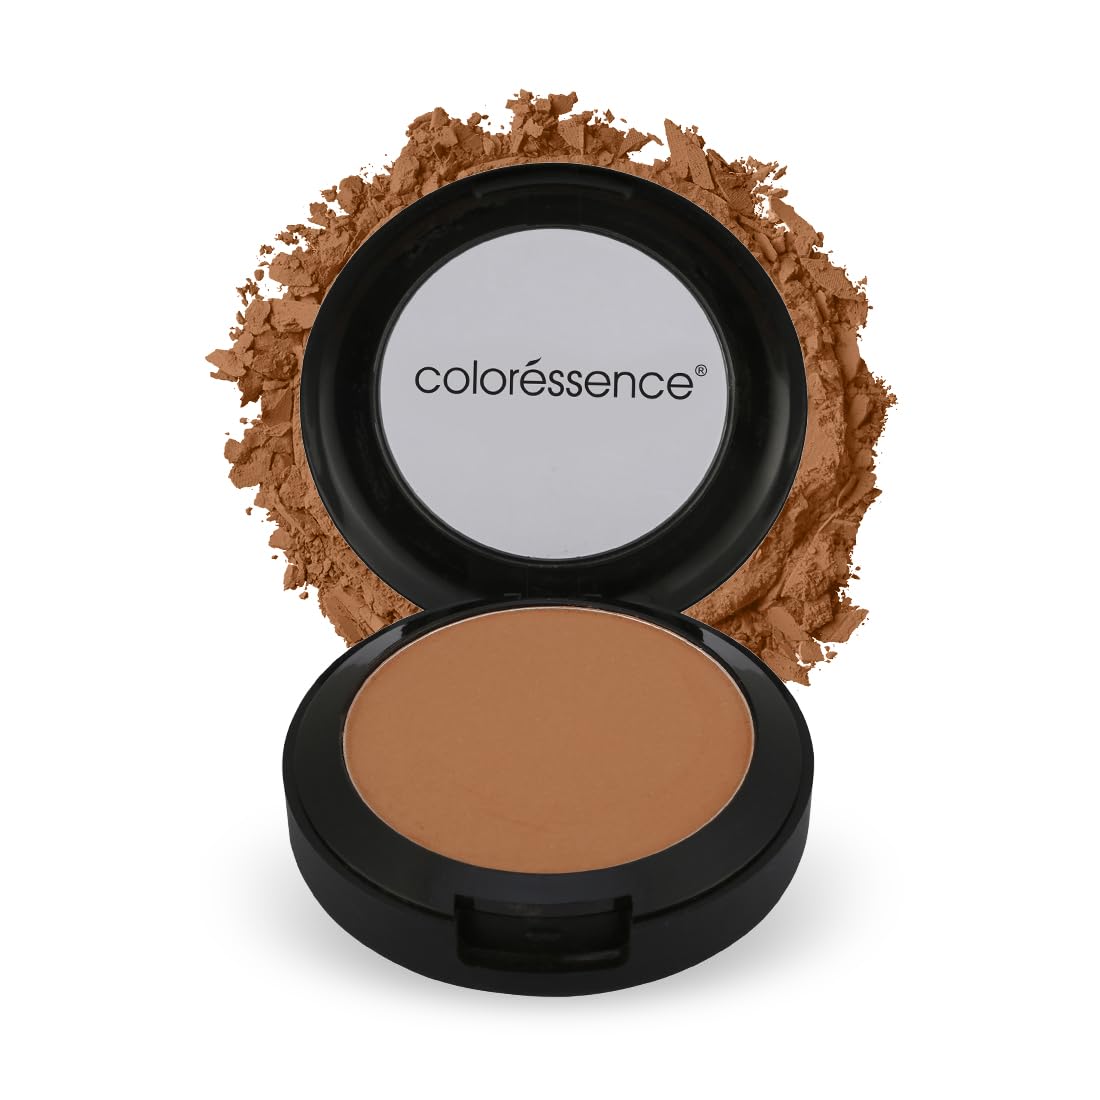 COLORESSENCE Matte Bronzer Contour Powder Natural Highlighter for Face Sculpting Sun Kissed Look | Oil Control & Waterproof | Creamy & Ultra Fine Texture, 10 gm 